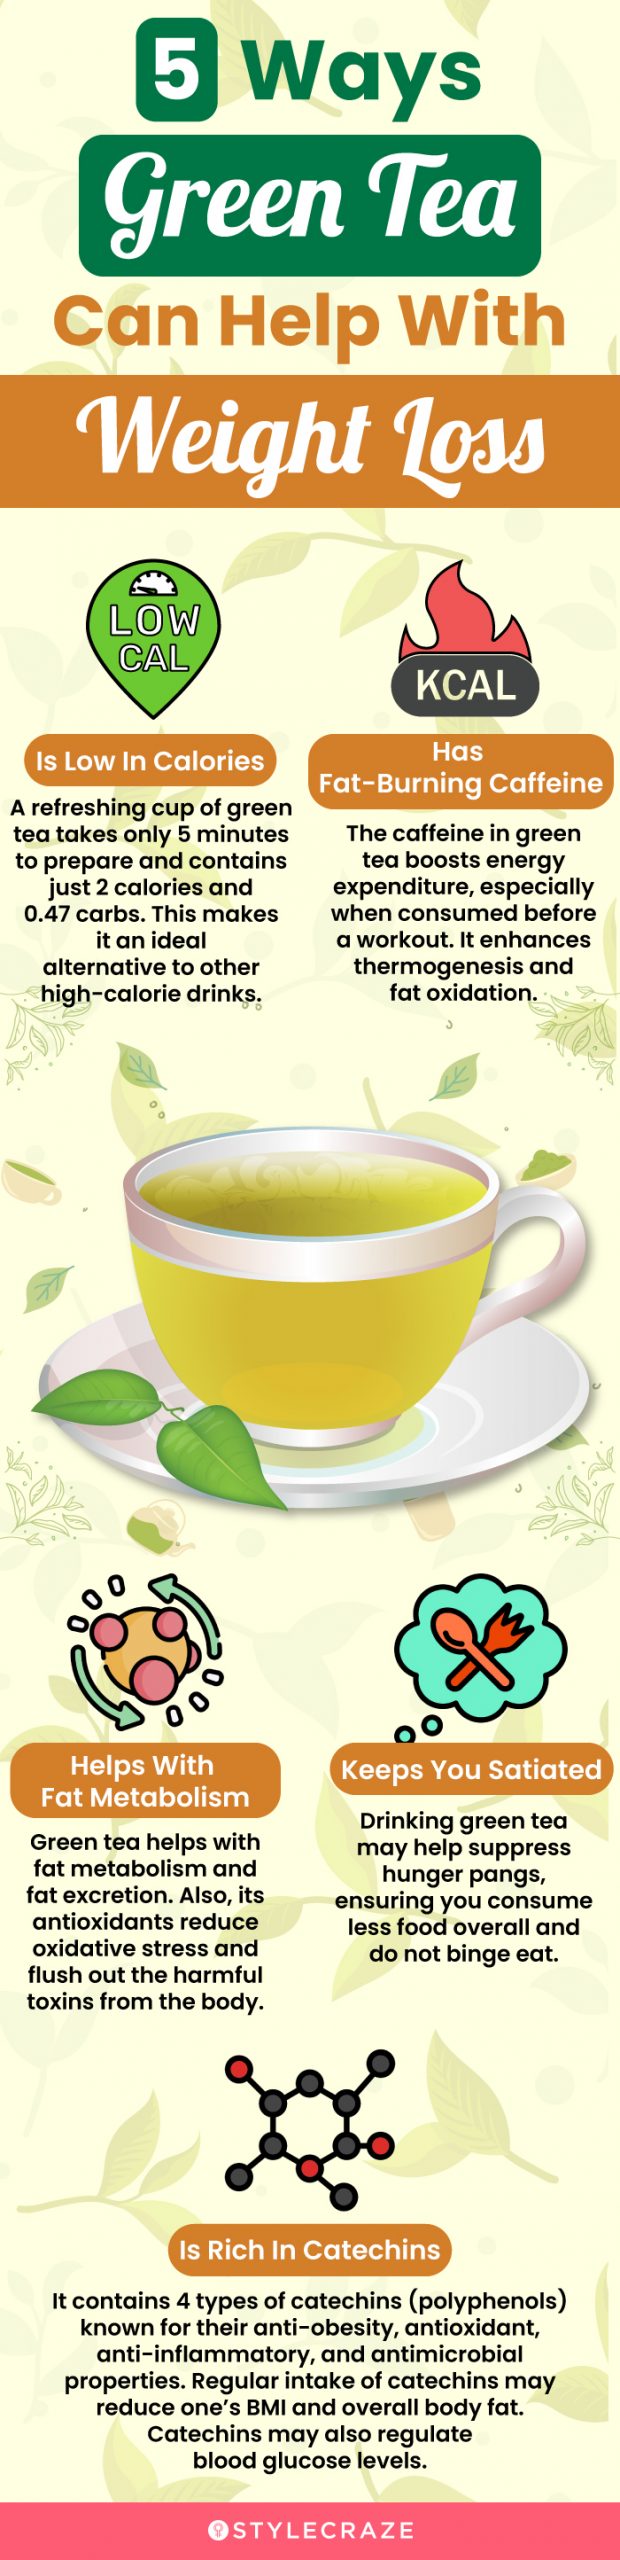 How to Achieve Weight Loss with Green Tea